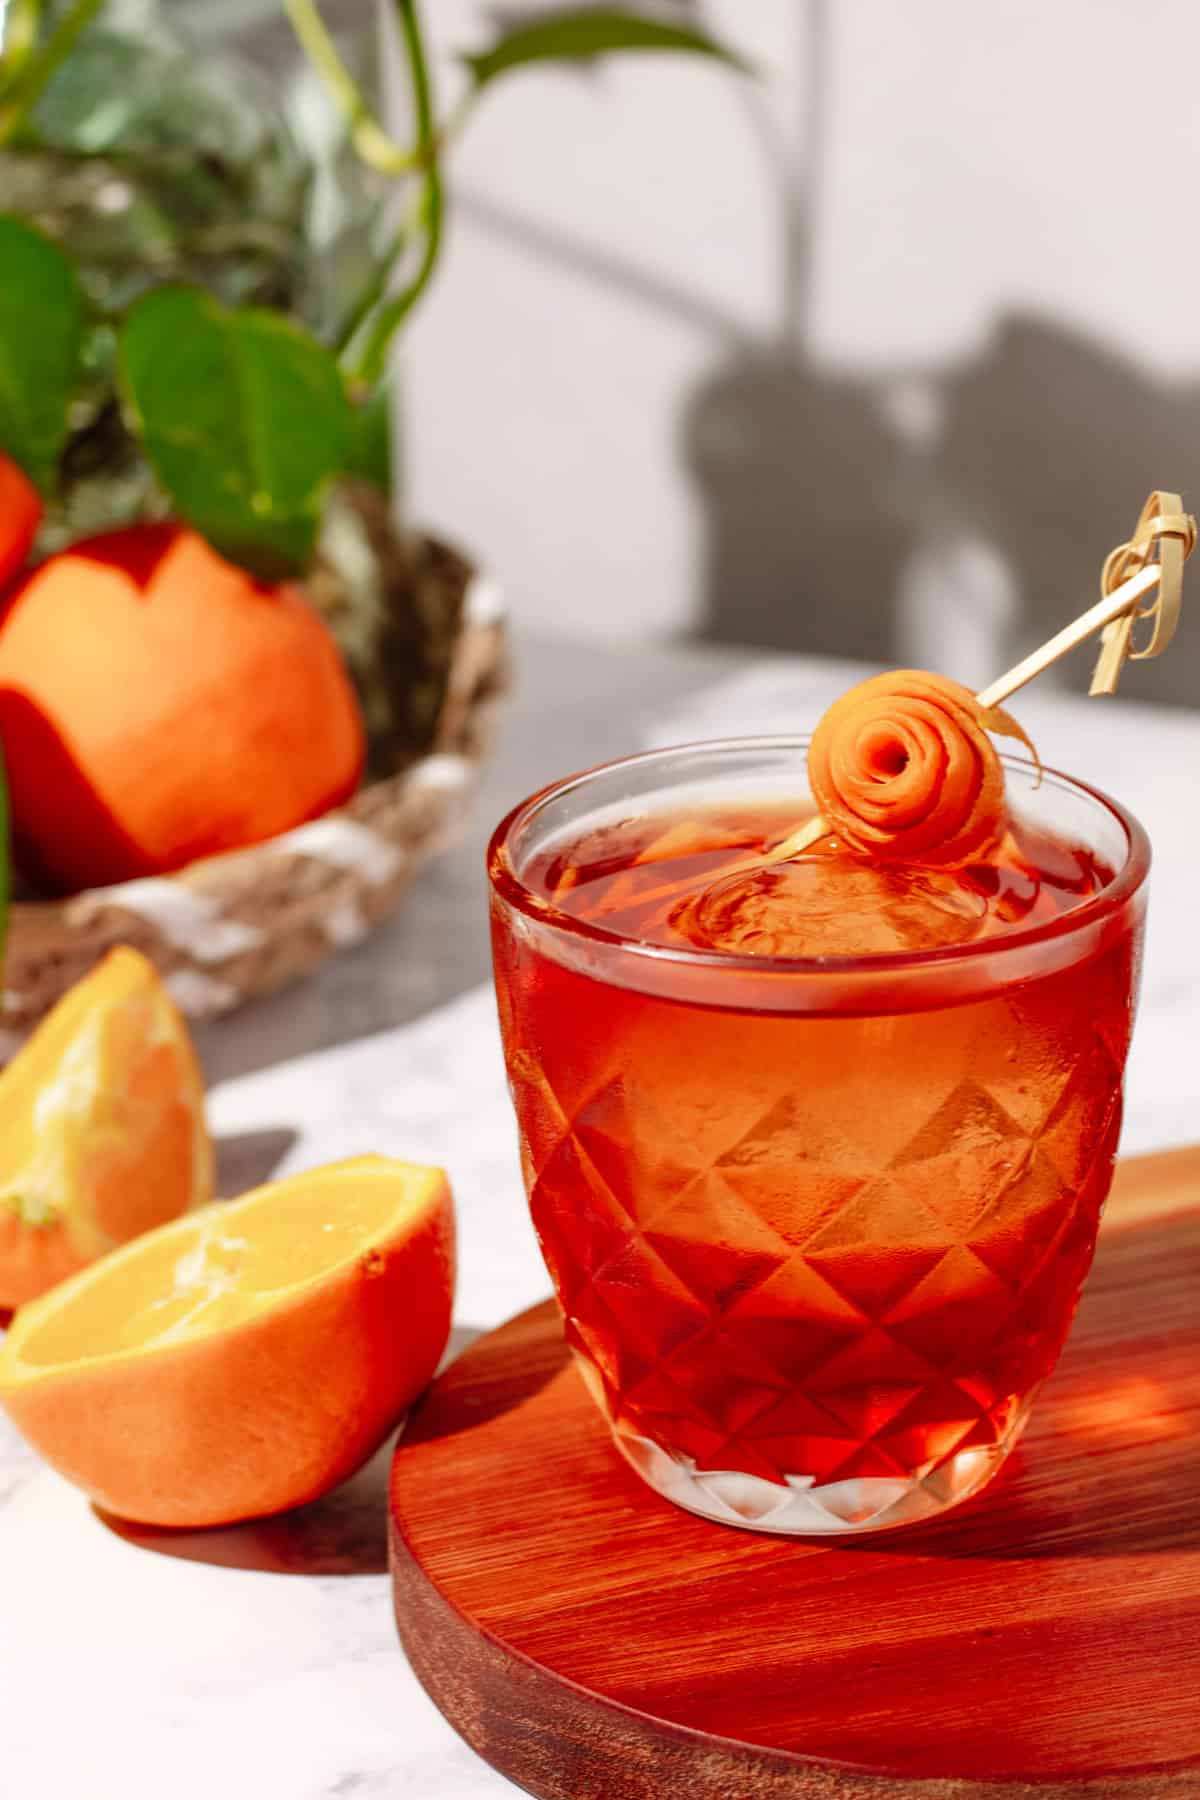 Aperol negroni on a wood cutting board with cut and whole oranges and a green plant in the background.